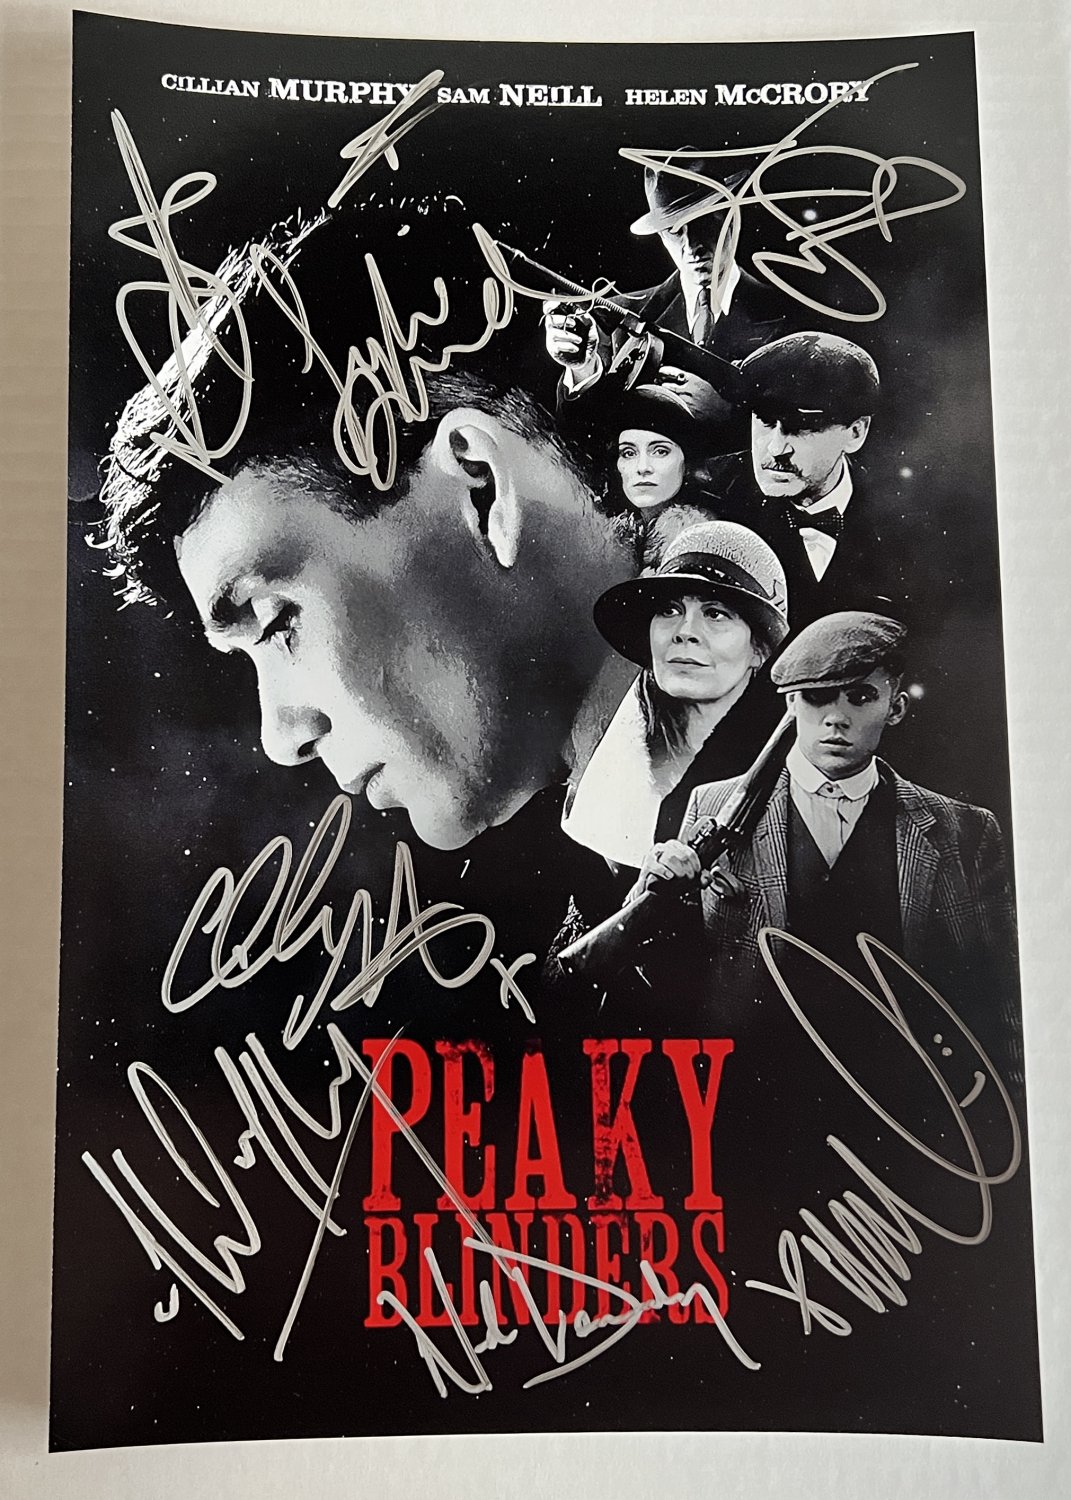 Peaky Blinders Cast Signed Autograph Photo Cillian Murphy 